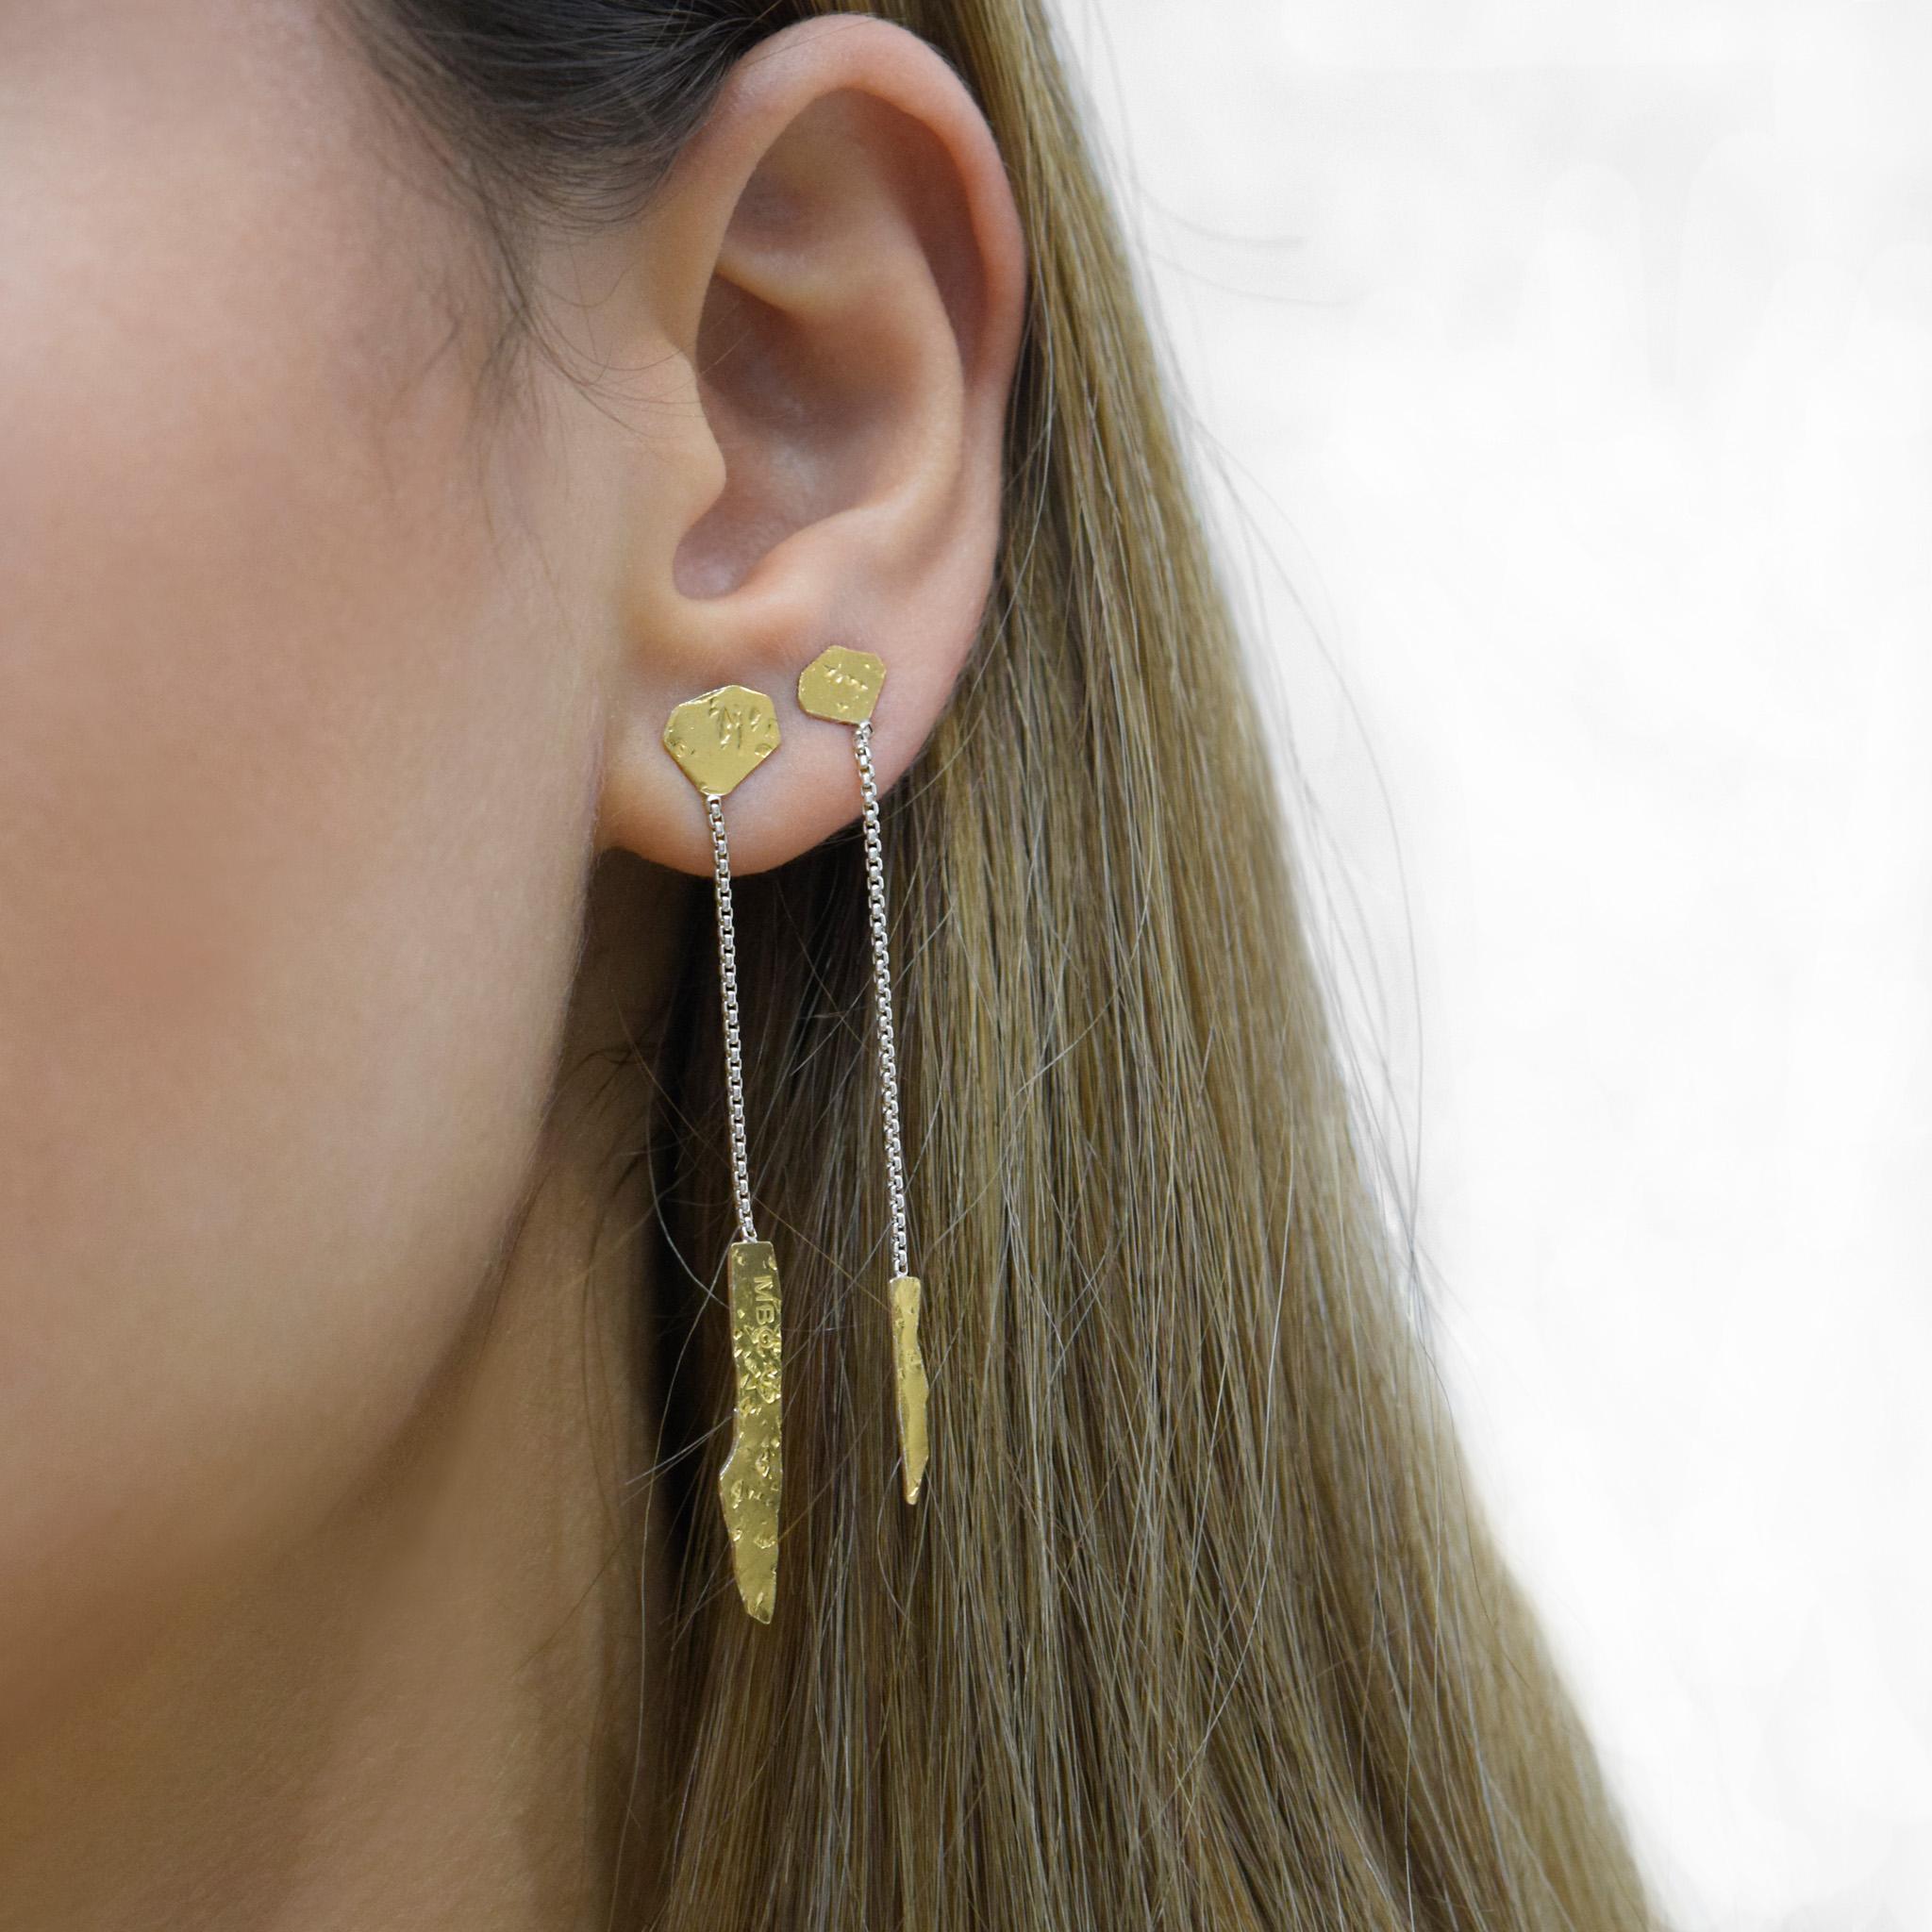 Artist Sunray Argentium Silver & 22K Gold Earring Handmade by Maria Blondet Jewelry For Sale